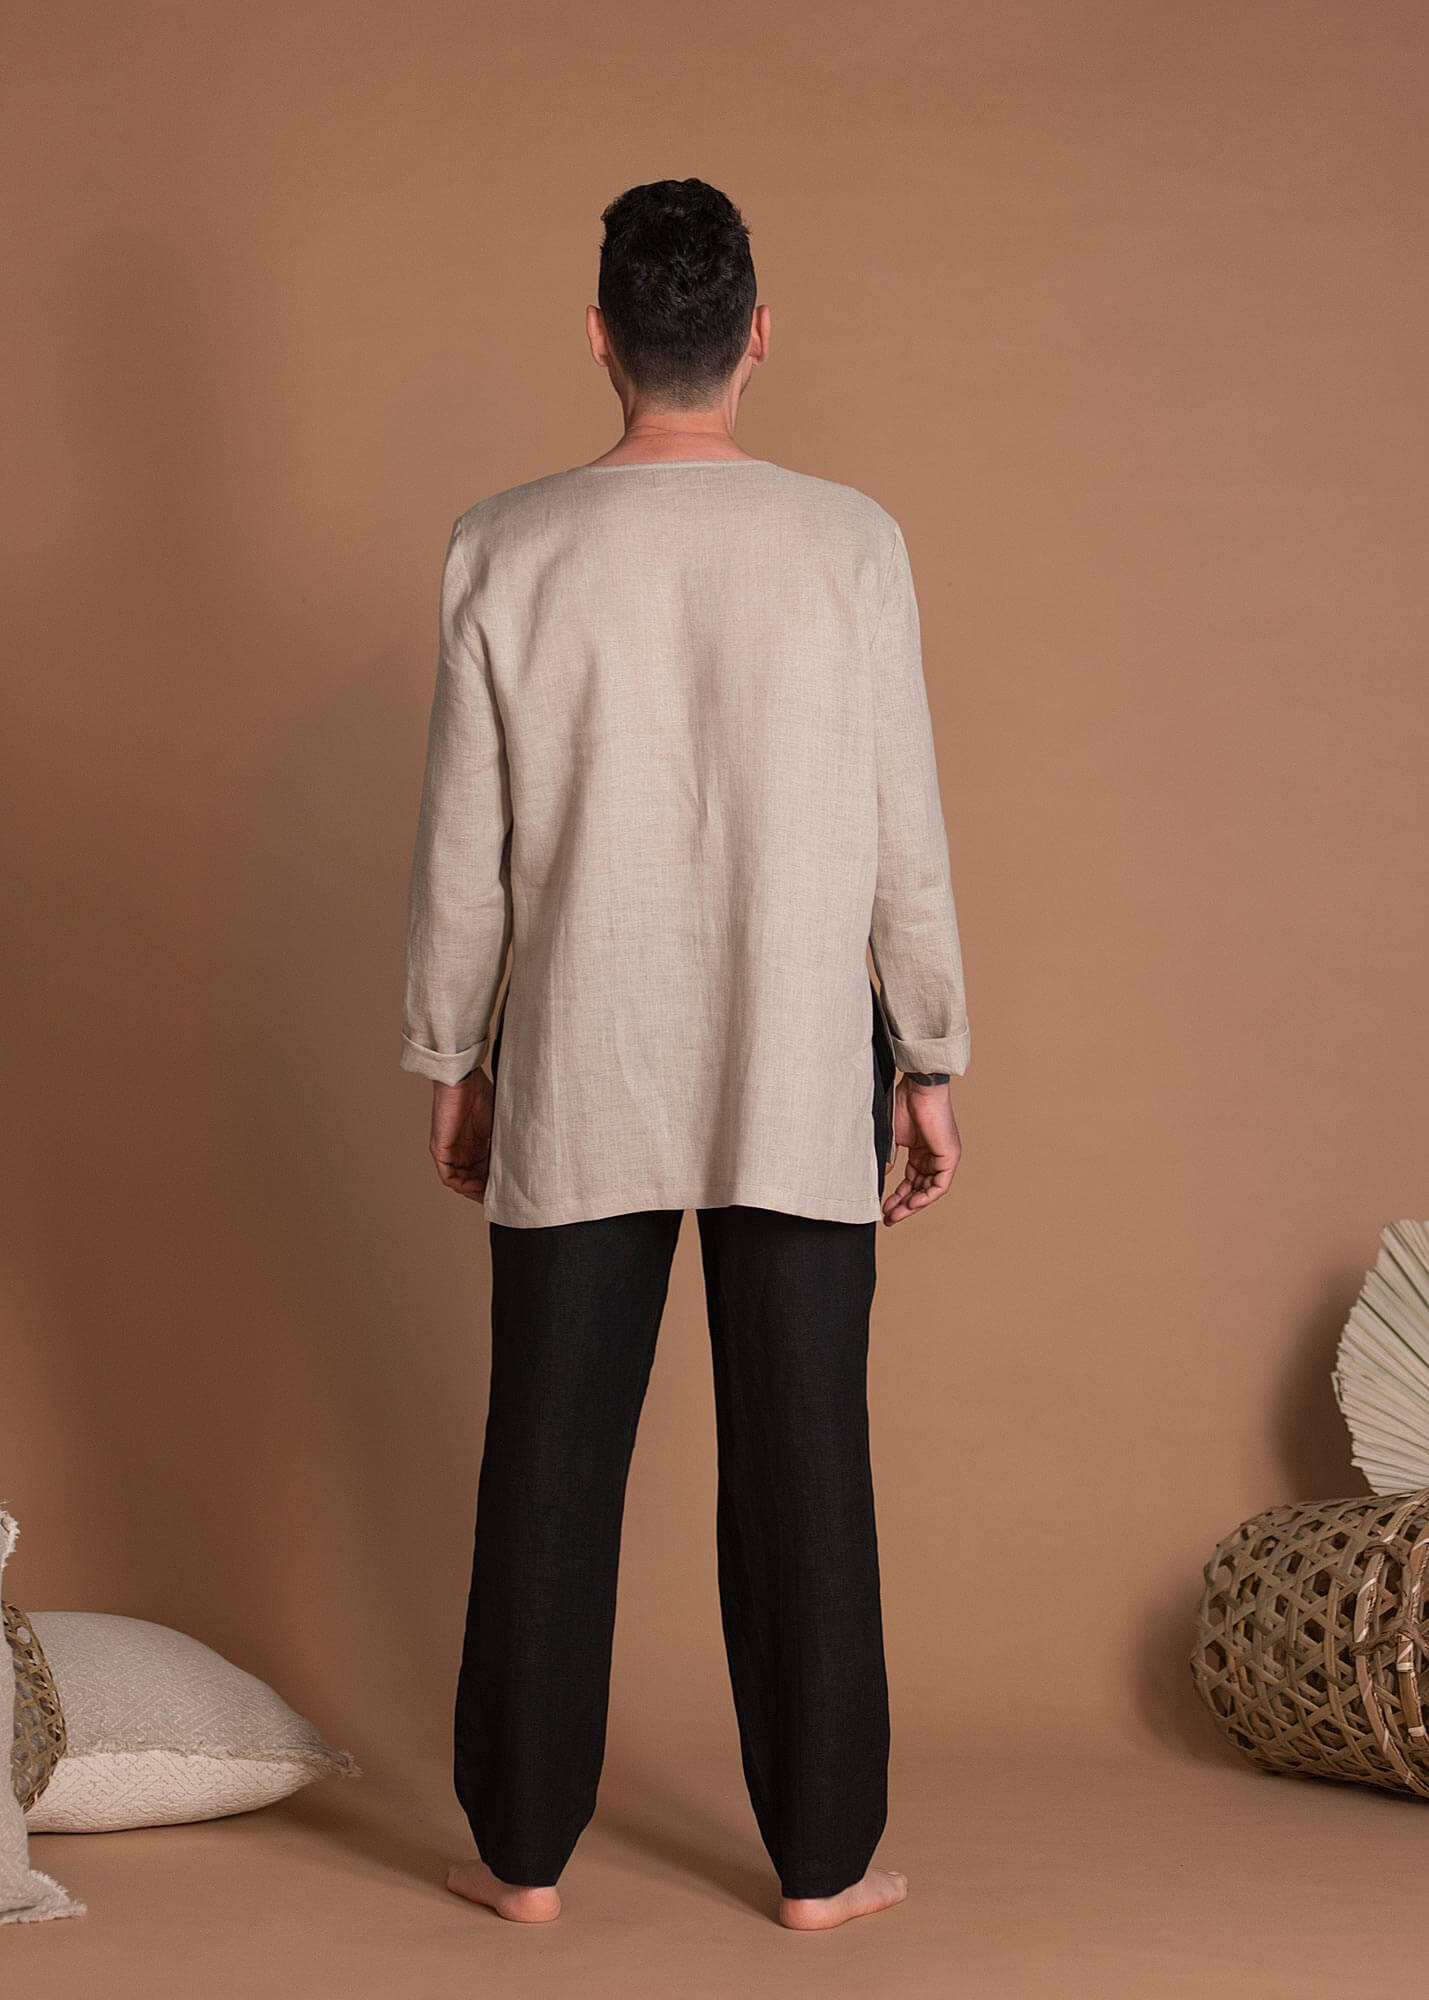 Men's Long Sleeves Linen Top With Side Slits